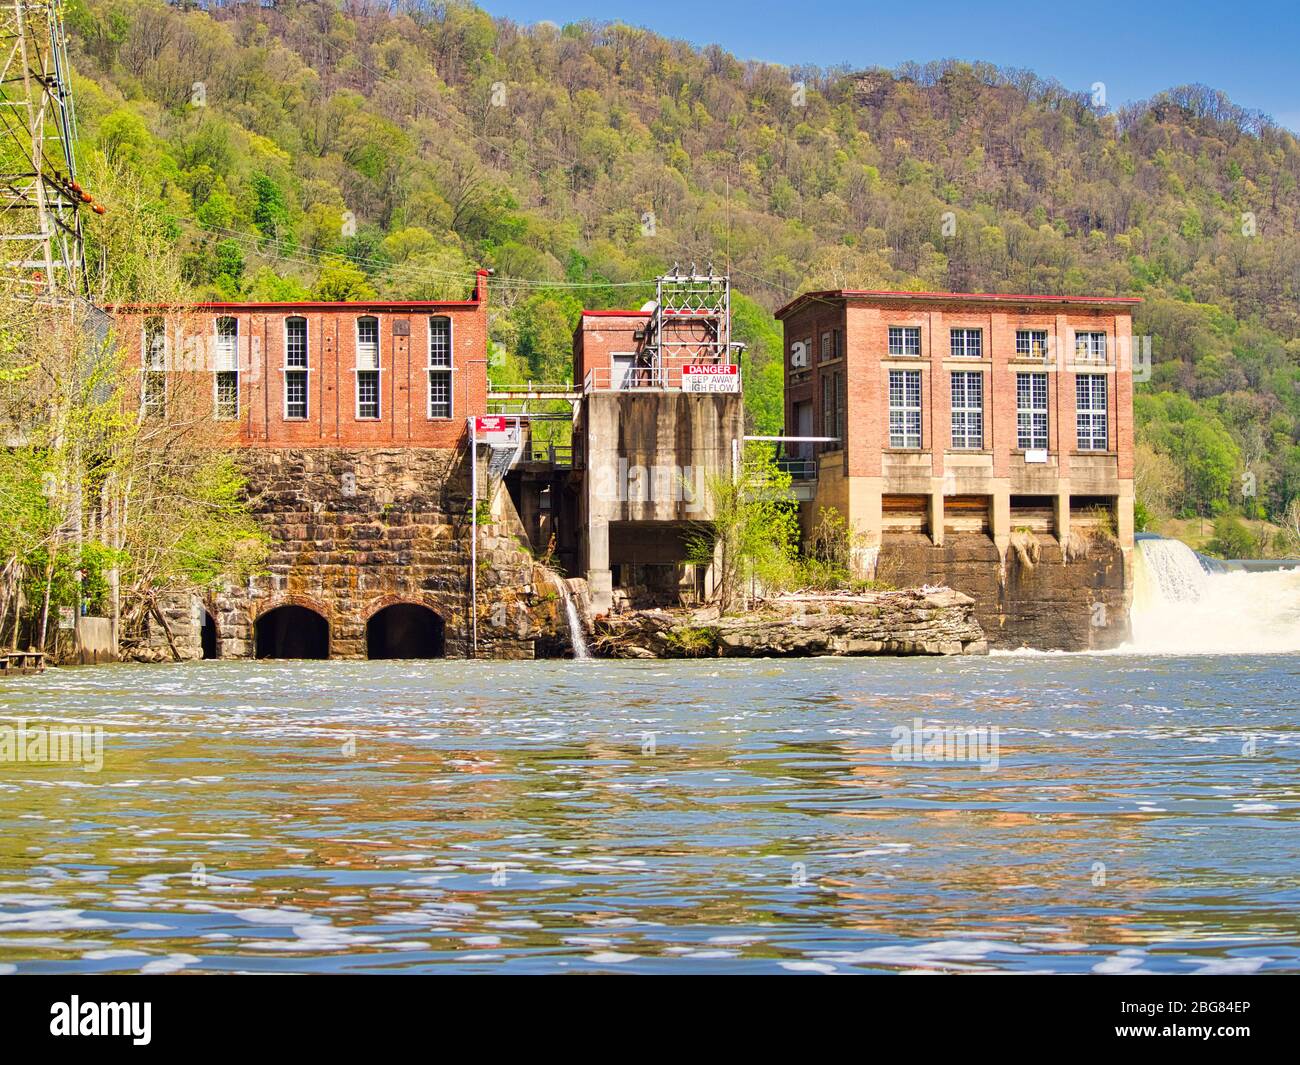 hydro electric power plant located in Gauley Bridge WV USA Stock Photo